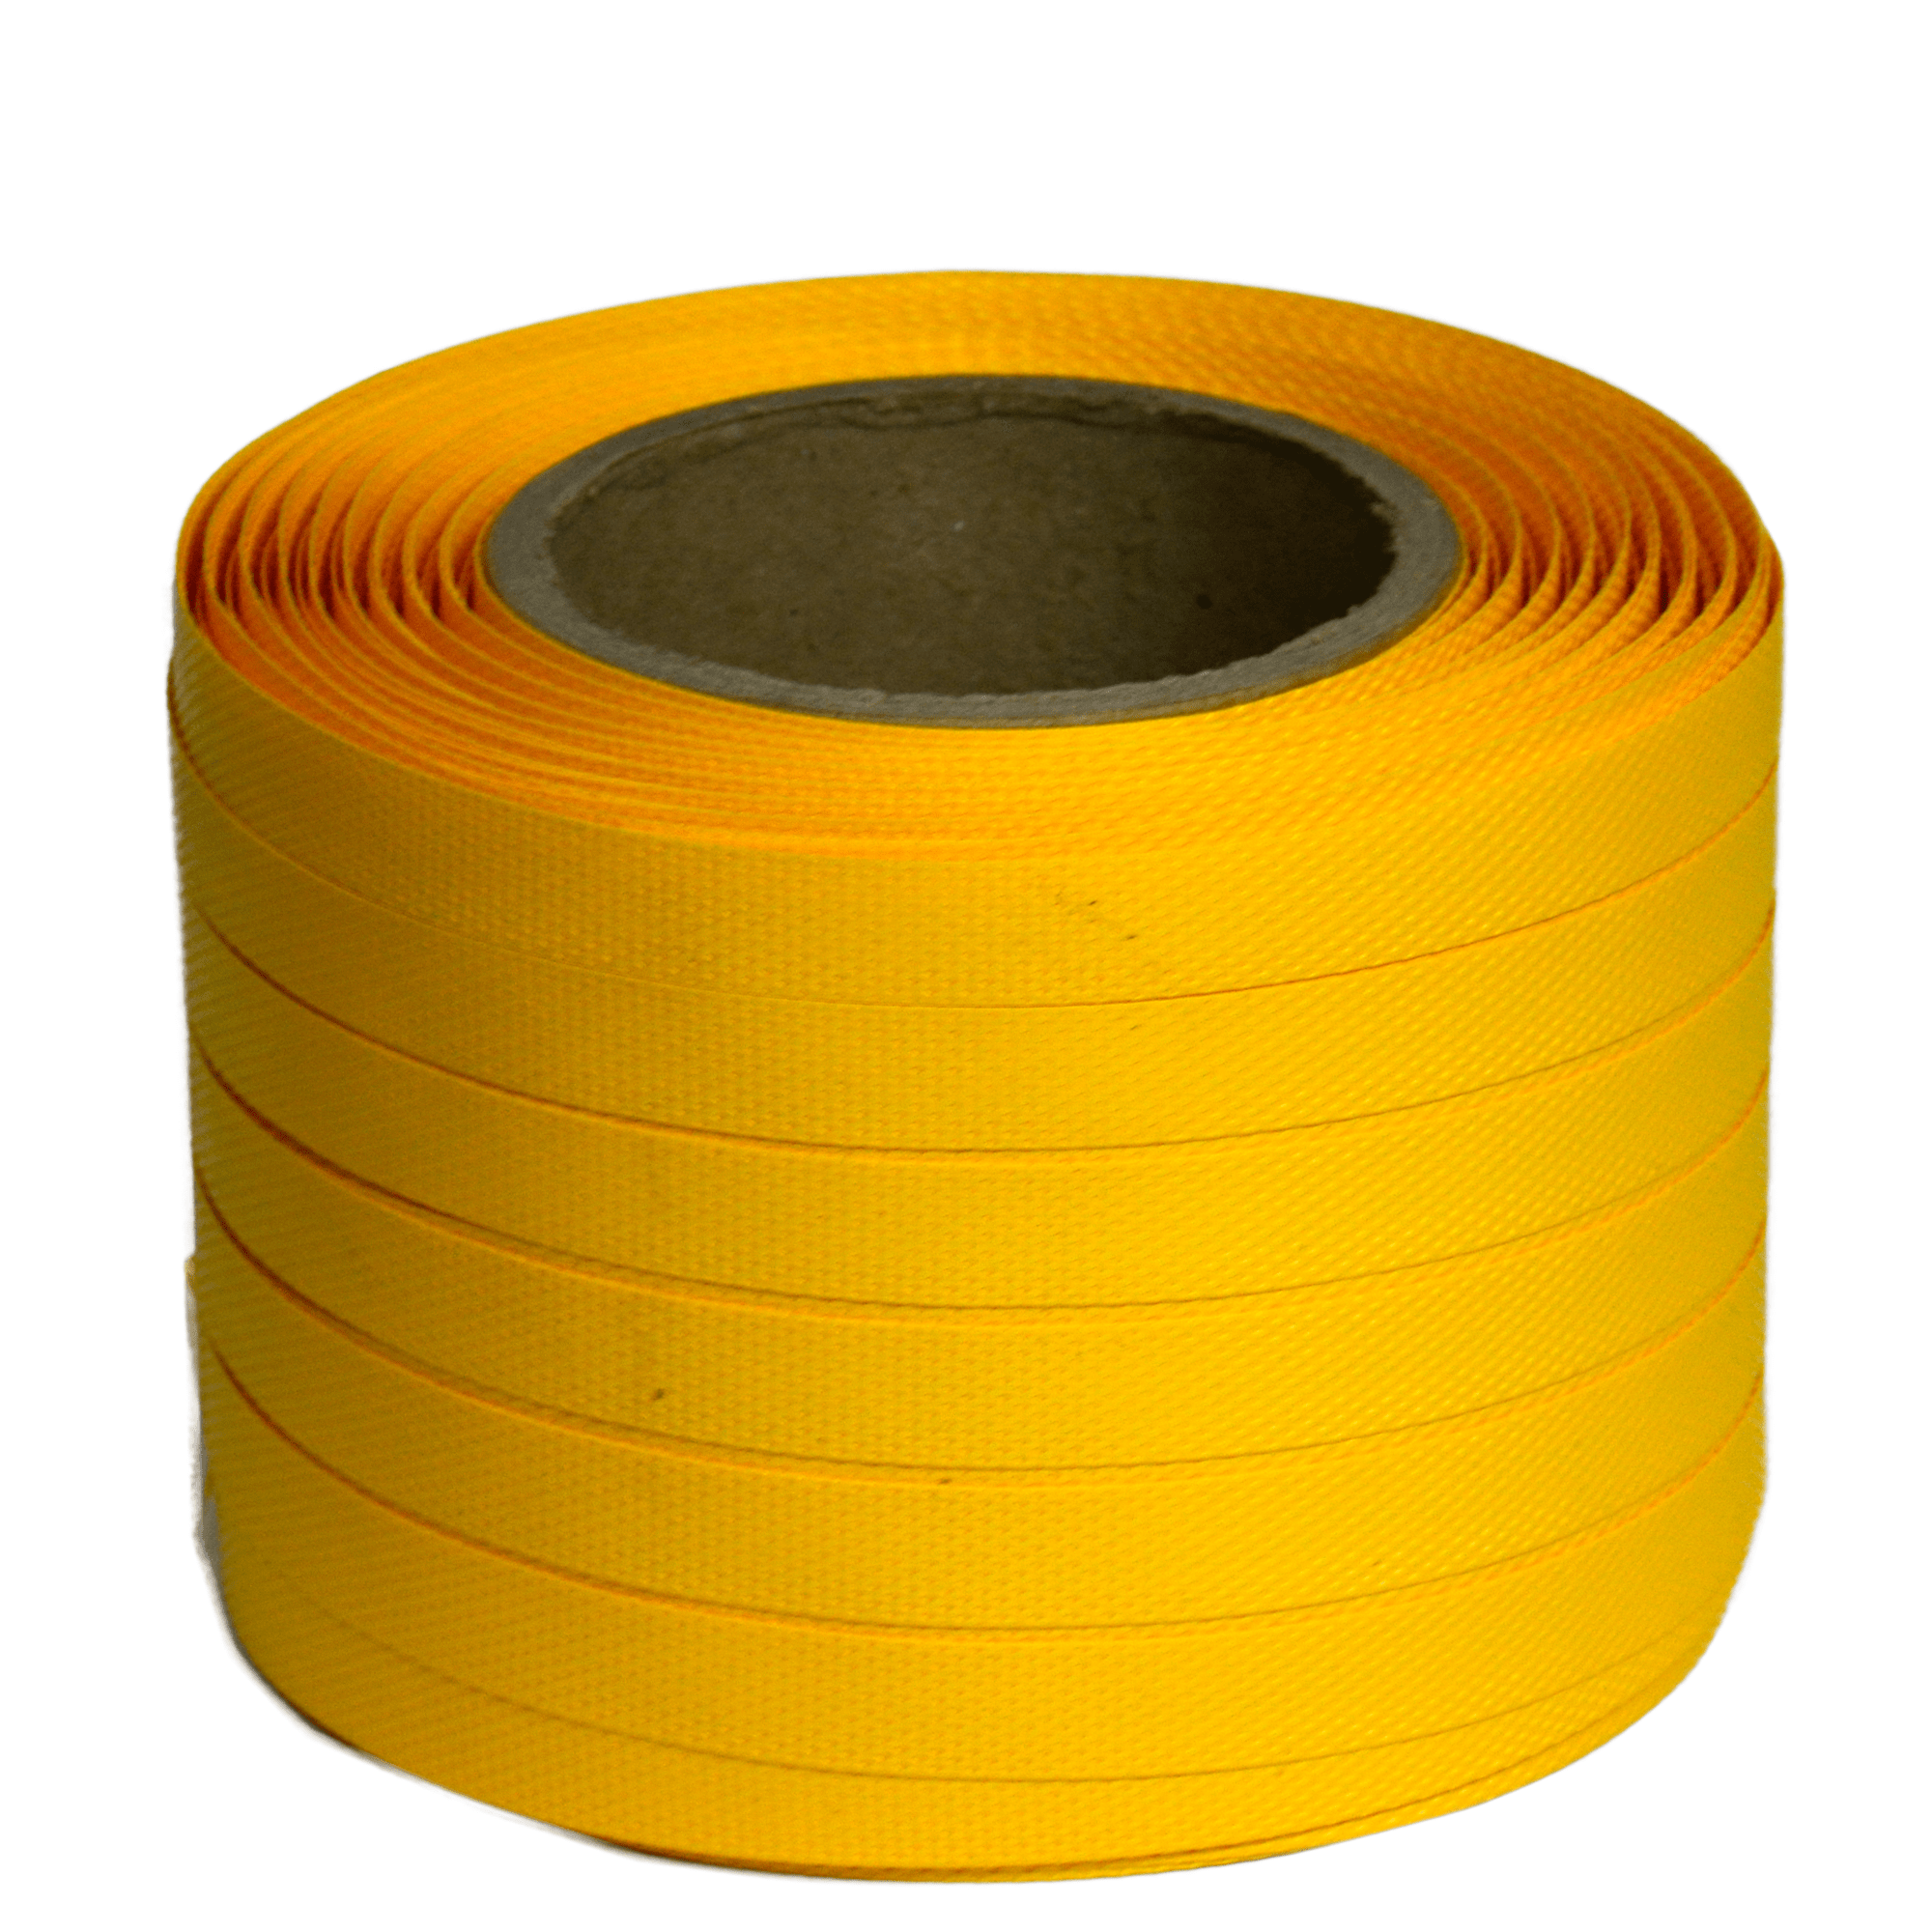 Pvc Packing Strip small - New Quality Ware